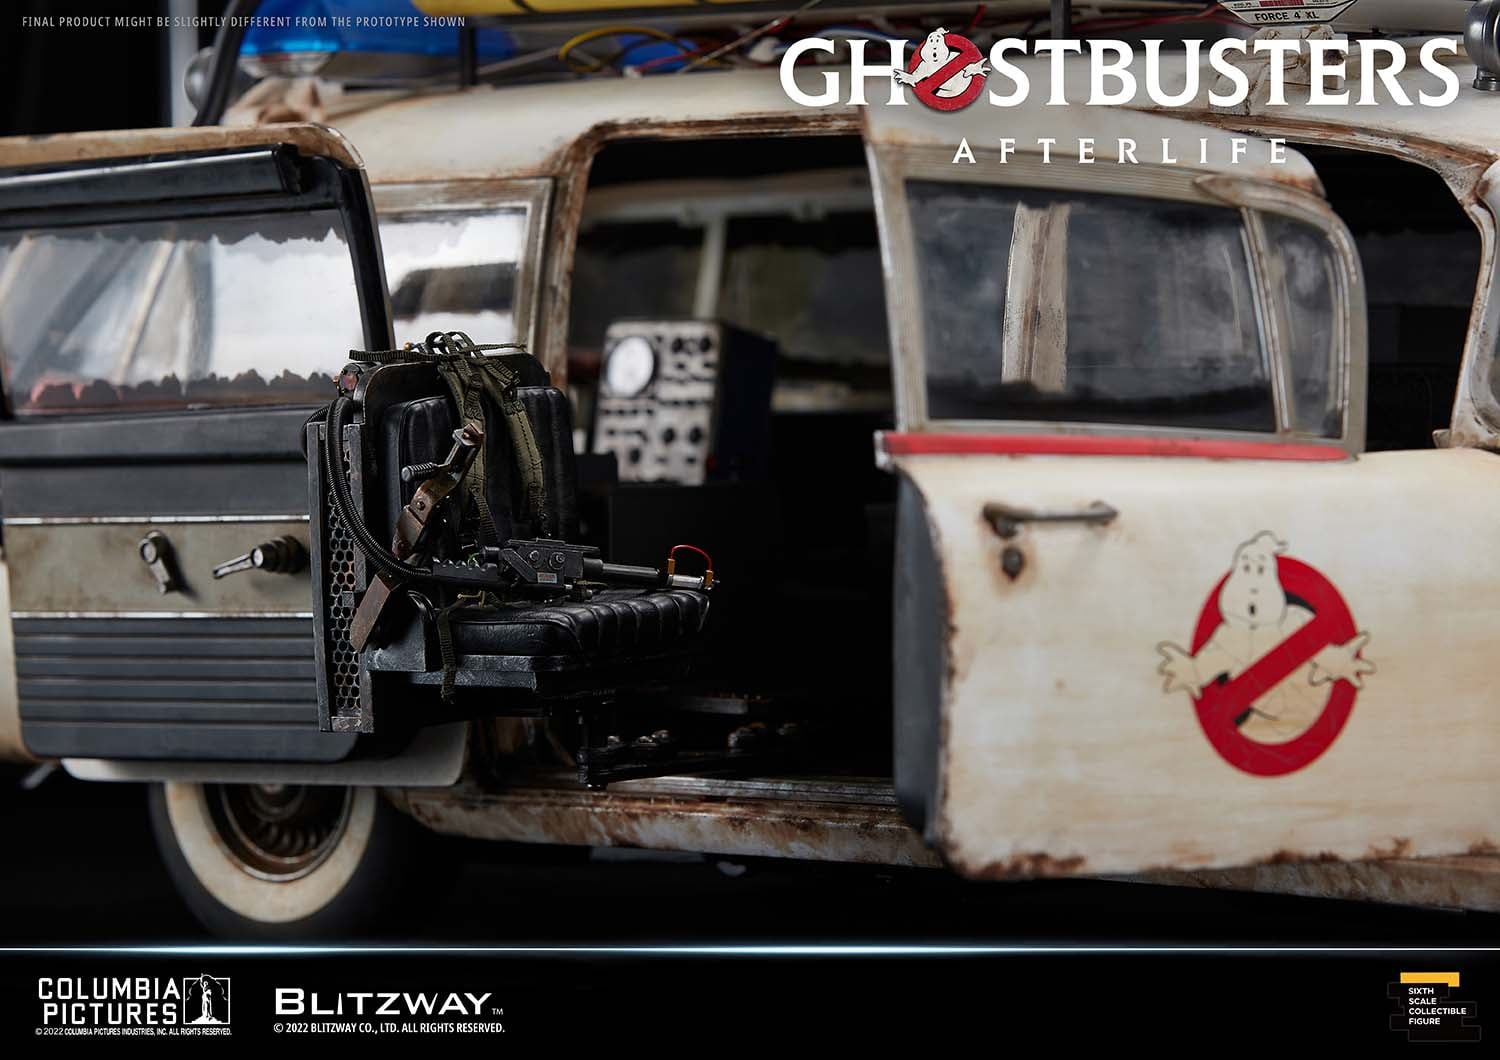 Ghostbusters Afterlife - ECTO-1 1/6 Scale - Spec Fiction Shop